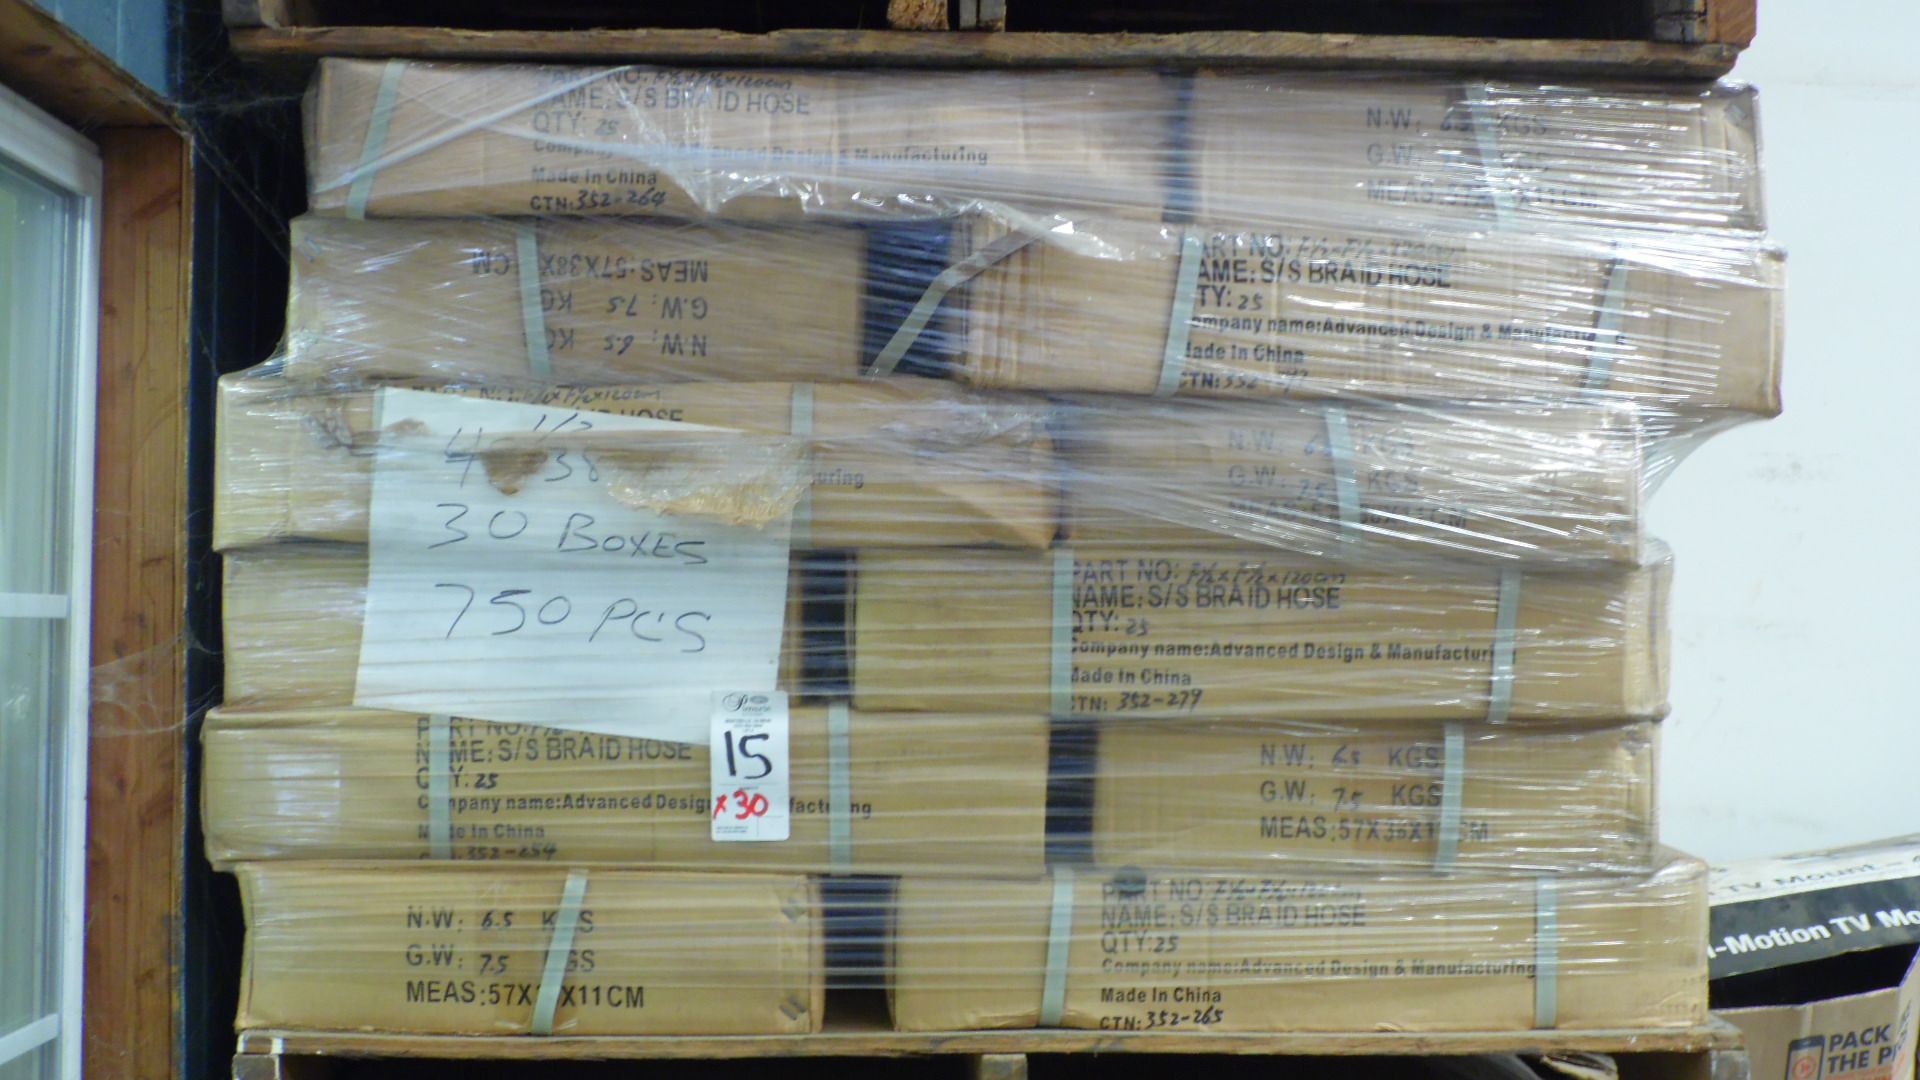 CASES OF S/S BRAIDED HOSE (QTY. 25)